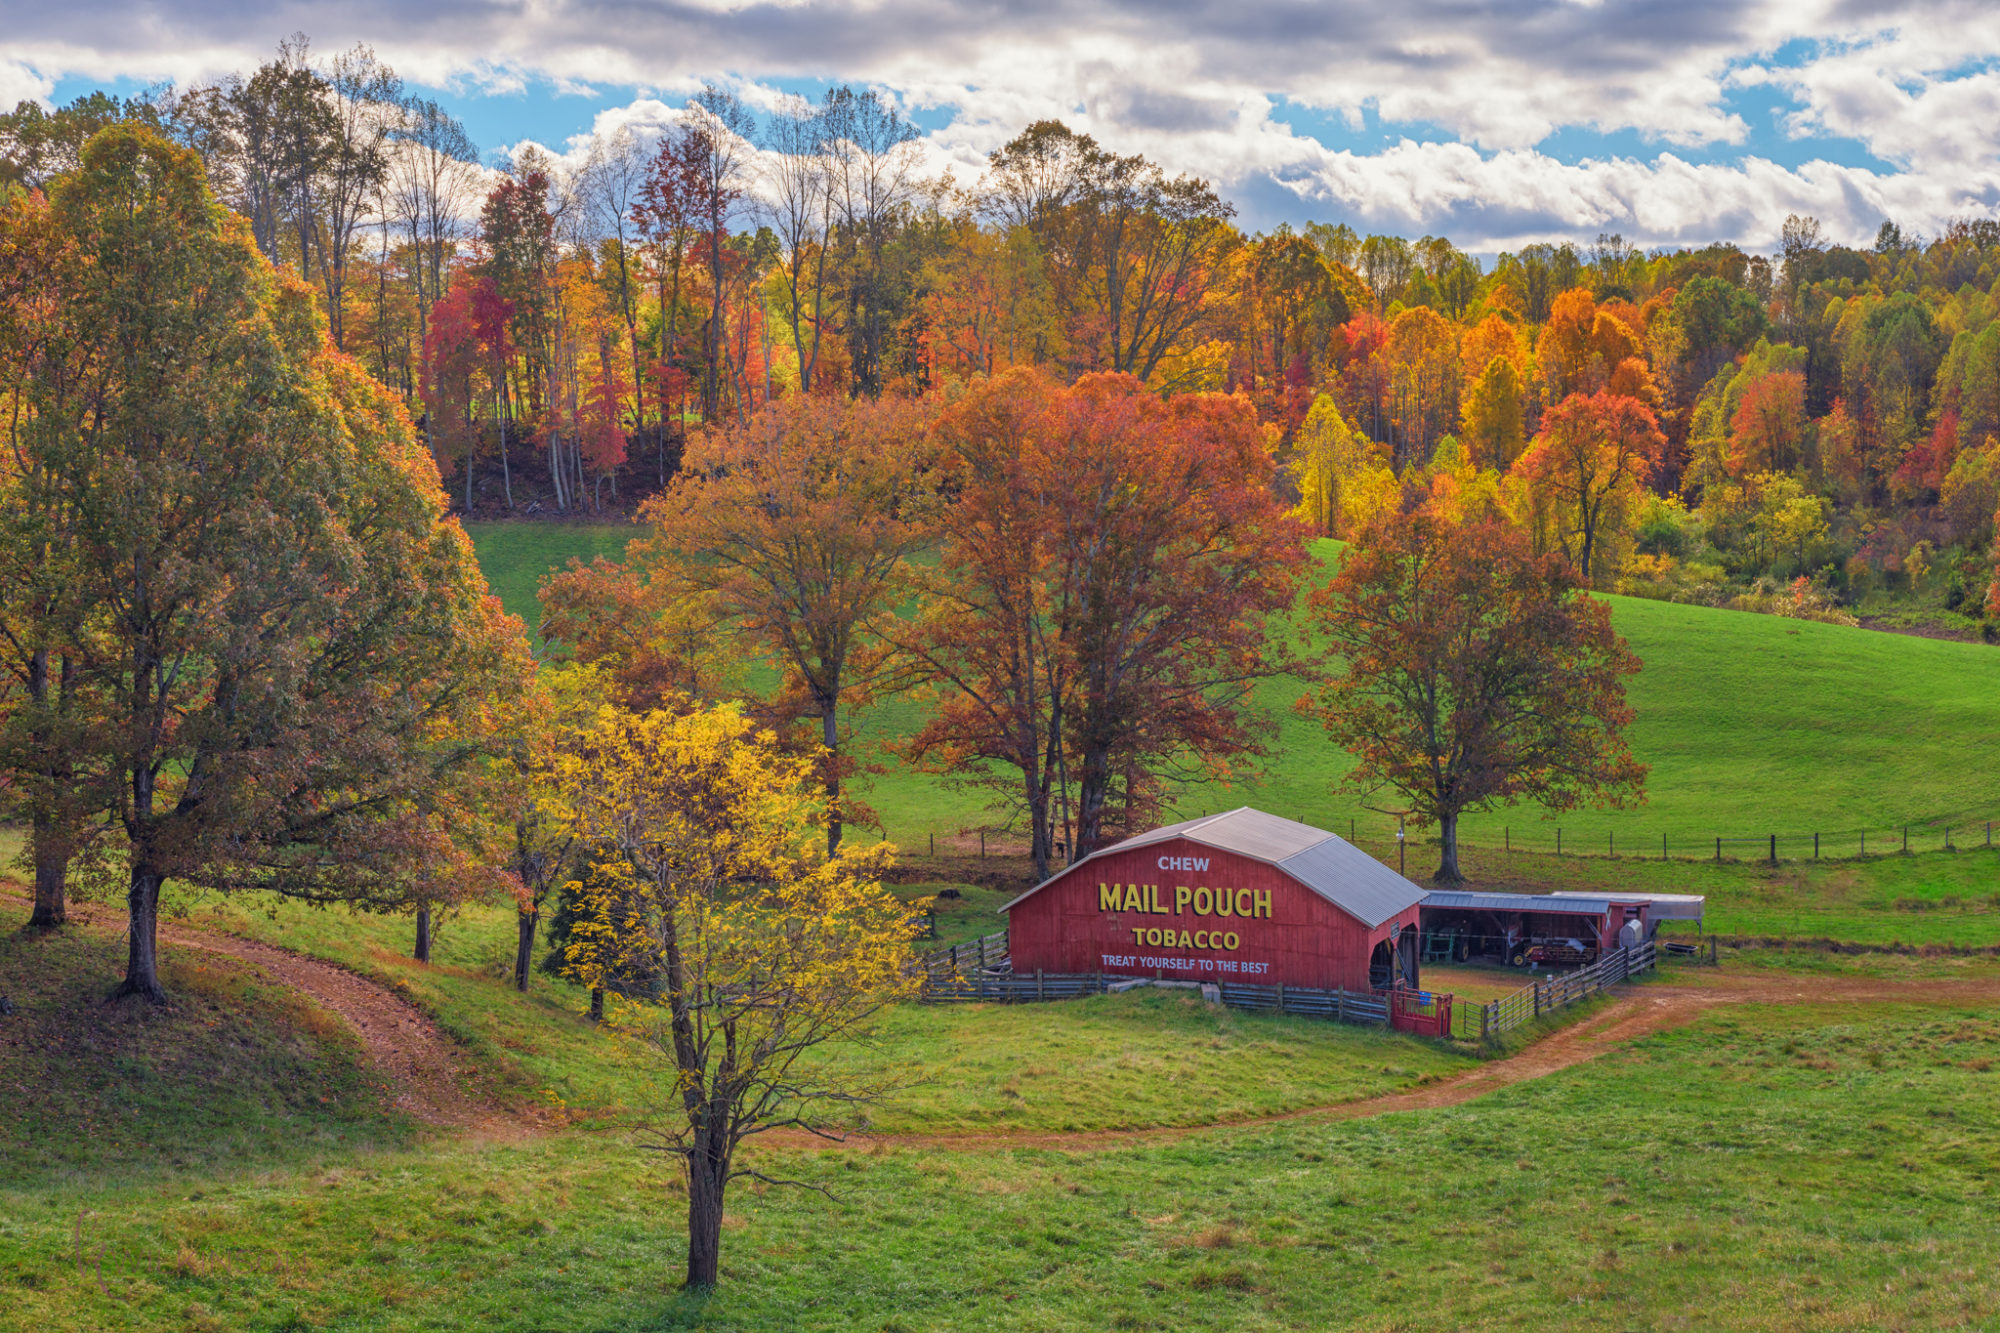 How to Find really good photo spots, tips shared on top US travel photography blog, Shannon Shipman:  Mail Pouch Barn in West Virginia